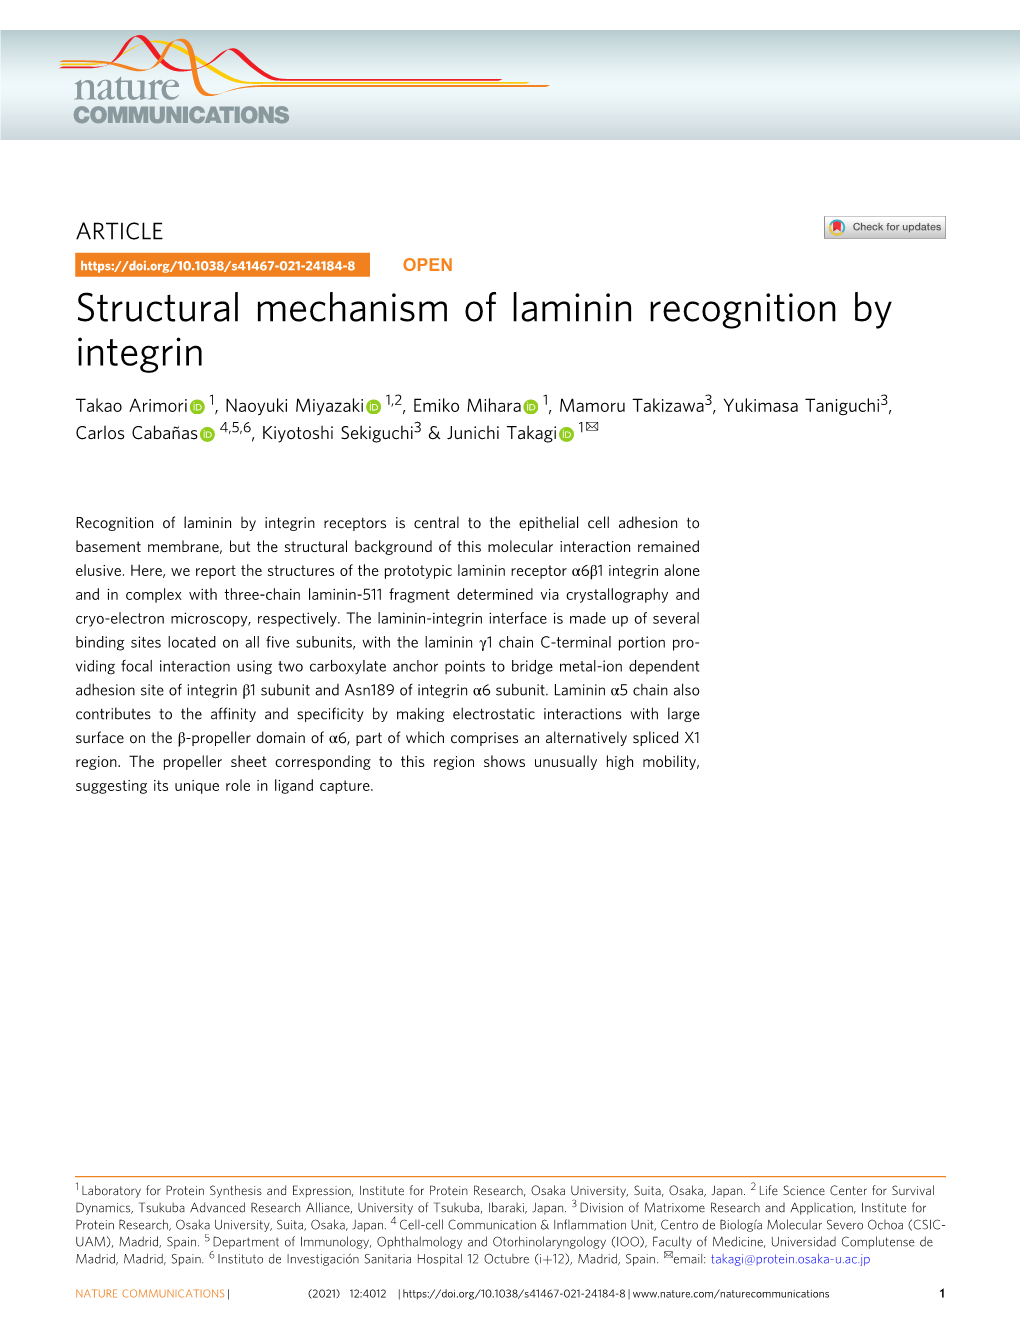 Structural Mechanism of Laminin Recognition by Integrin